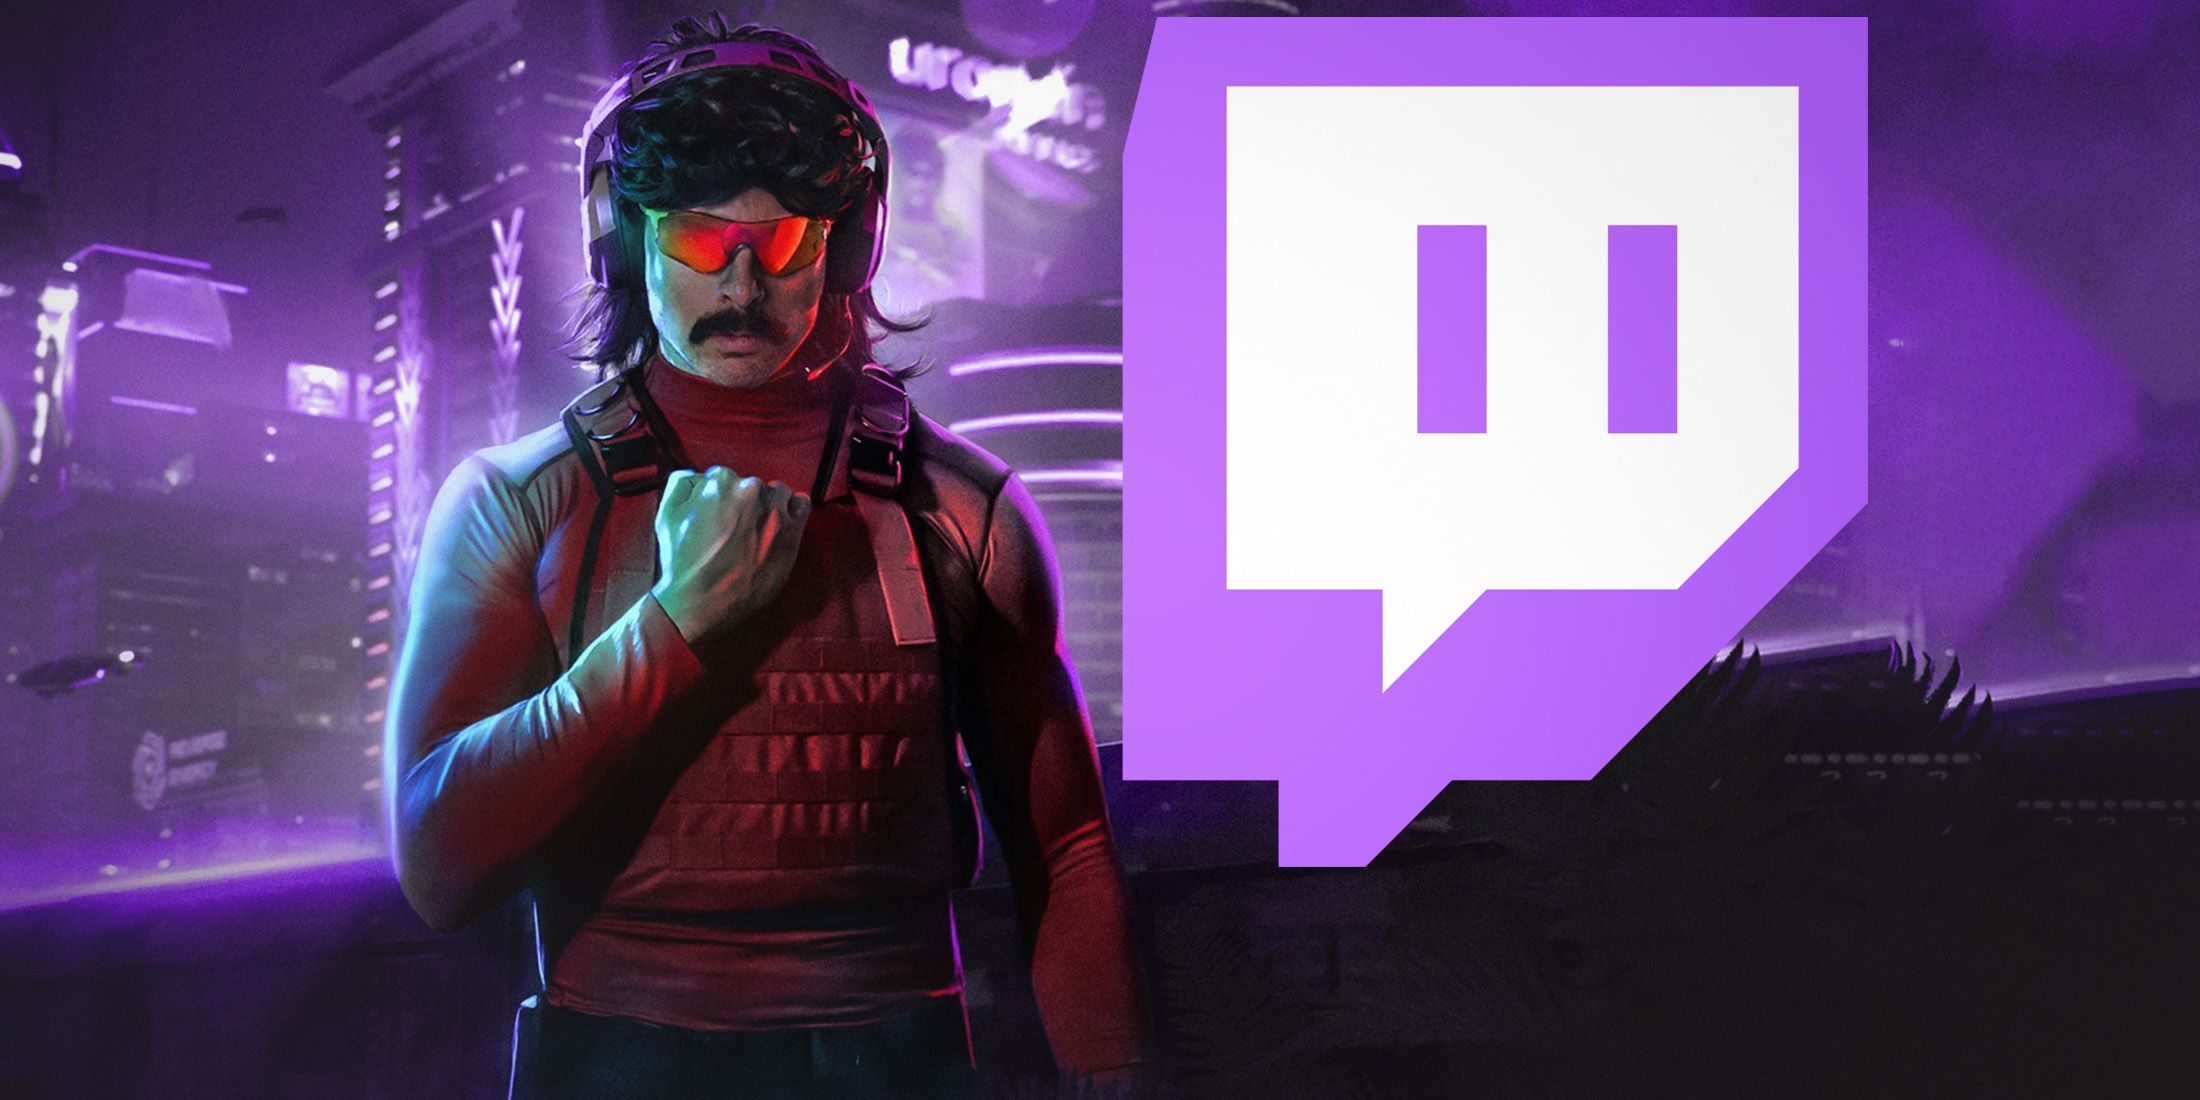 Dr Disrespect next to old Twitch logo submark on purple futuristic cityscape background